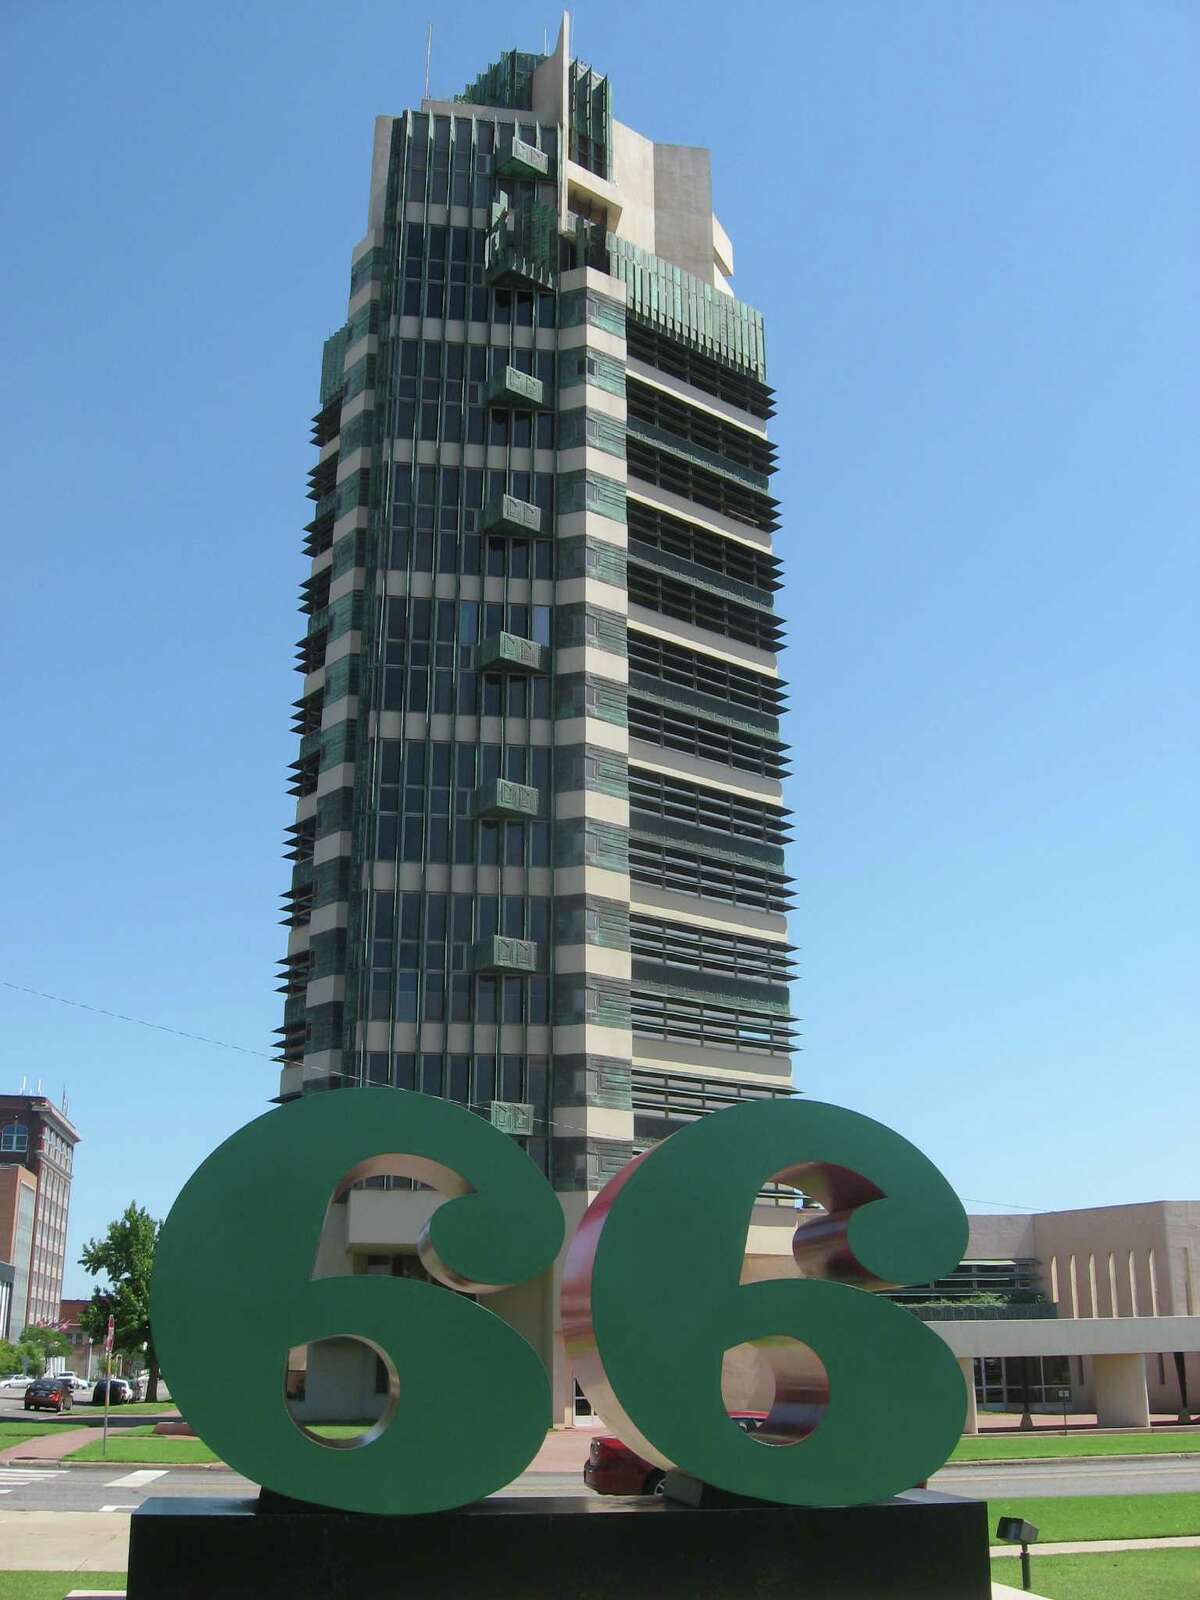 The Price Tower in Bartlesville, Oklahoma, is 19 stories tall and includes many of architect Frank Lloyd Wright’s signature design touches.